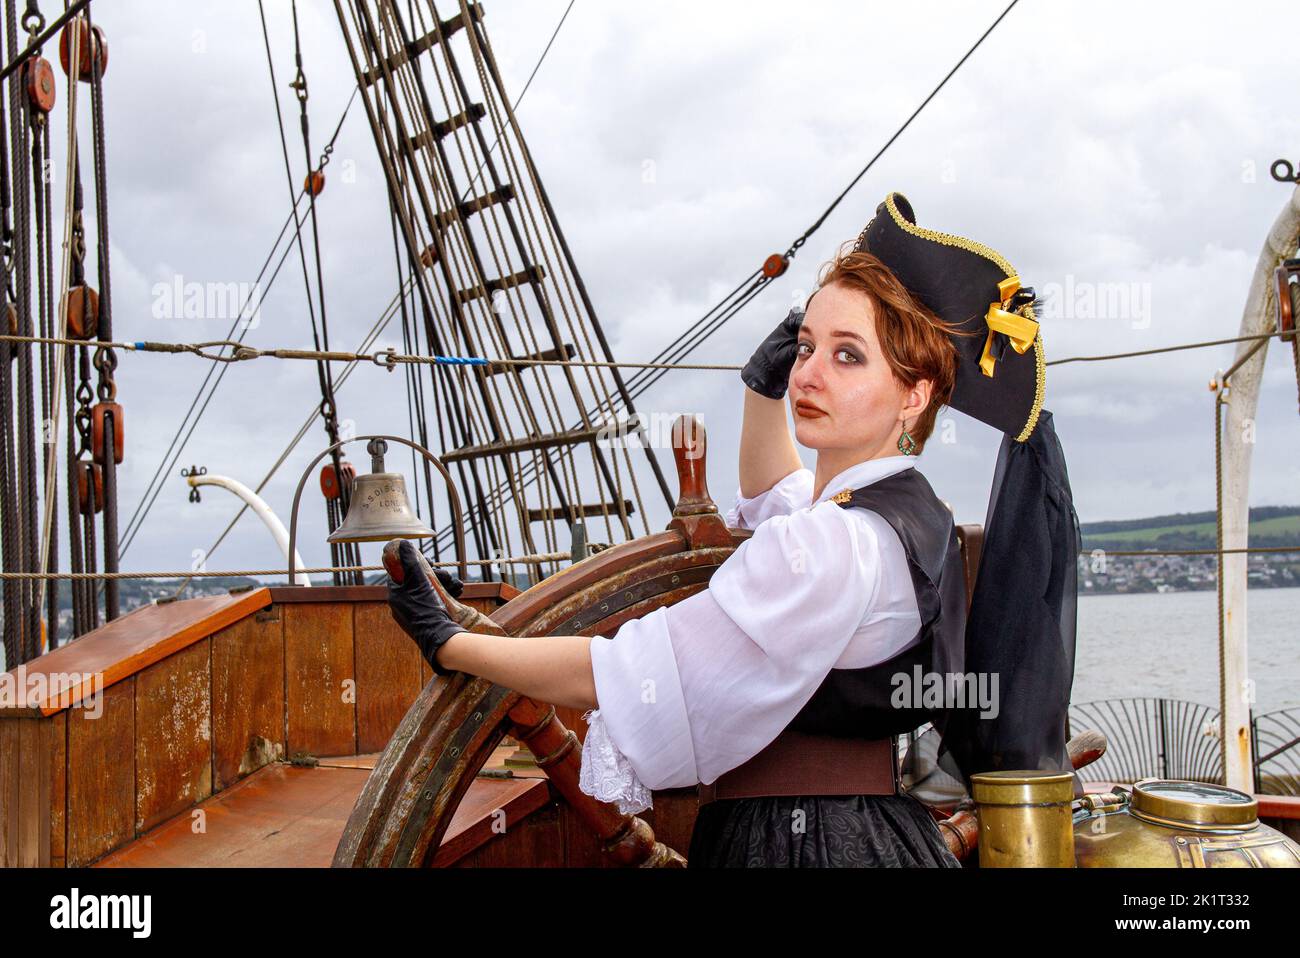 Ashley Wilkinson wearing a cosplay pirate costume onboard the RRS Discovery Ship during a photo-shoot in Dundee, Scotland Stock Photo